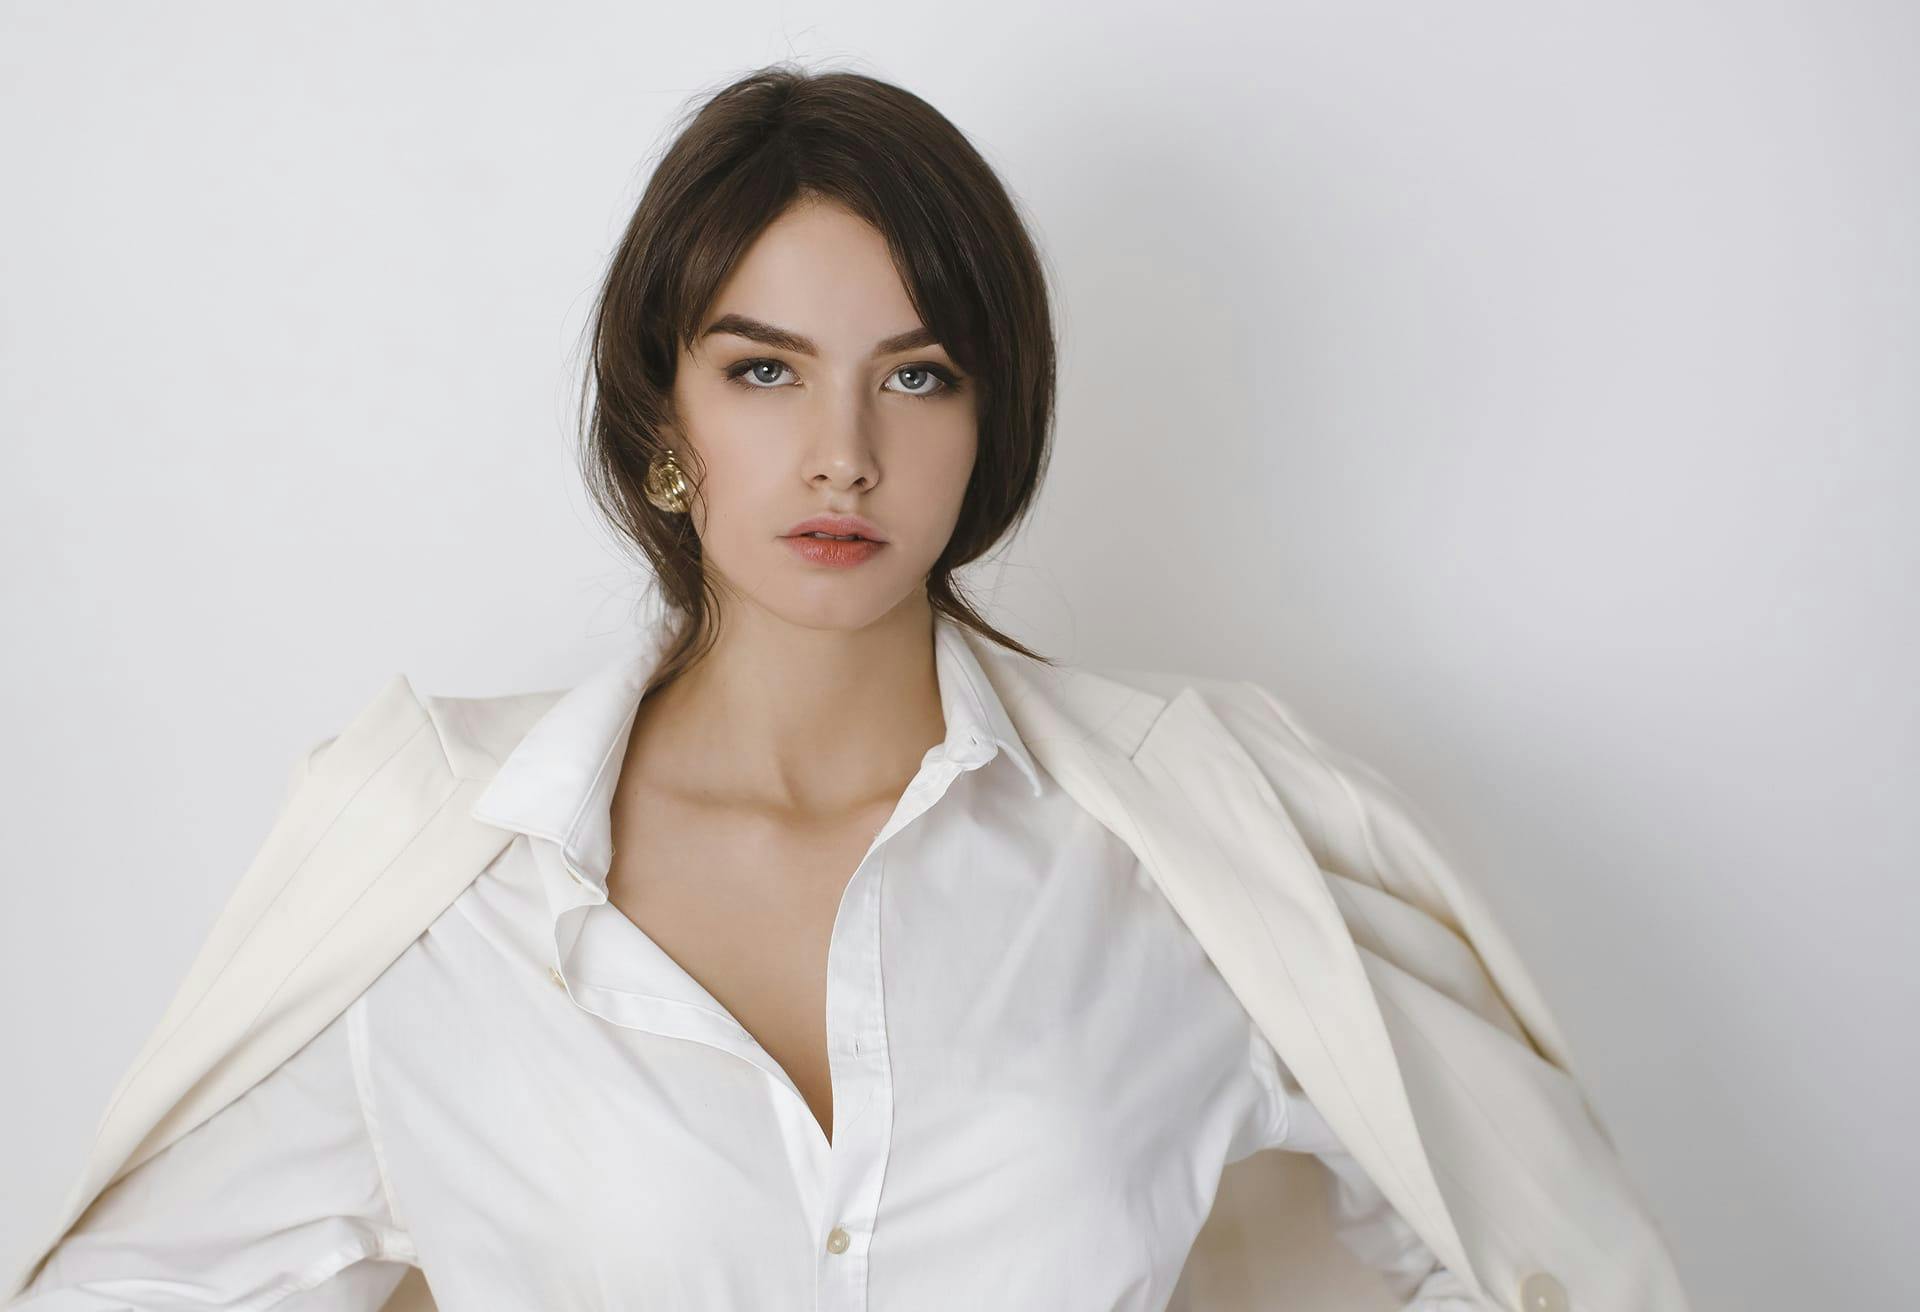 Woman in white white shirt and coat